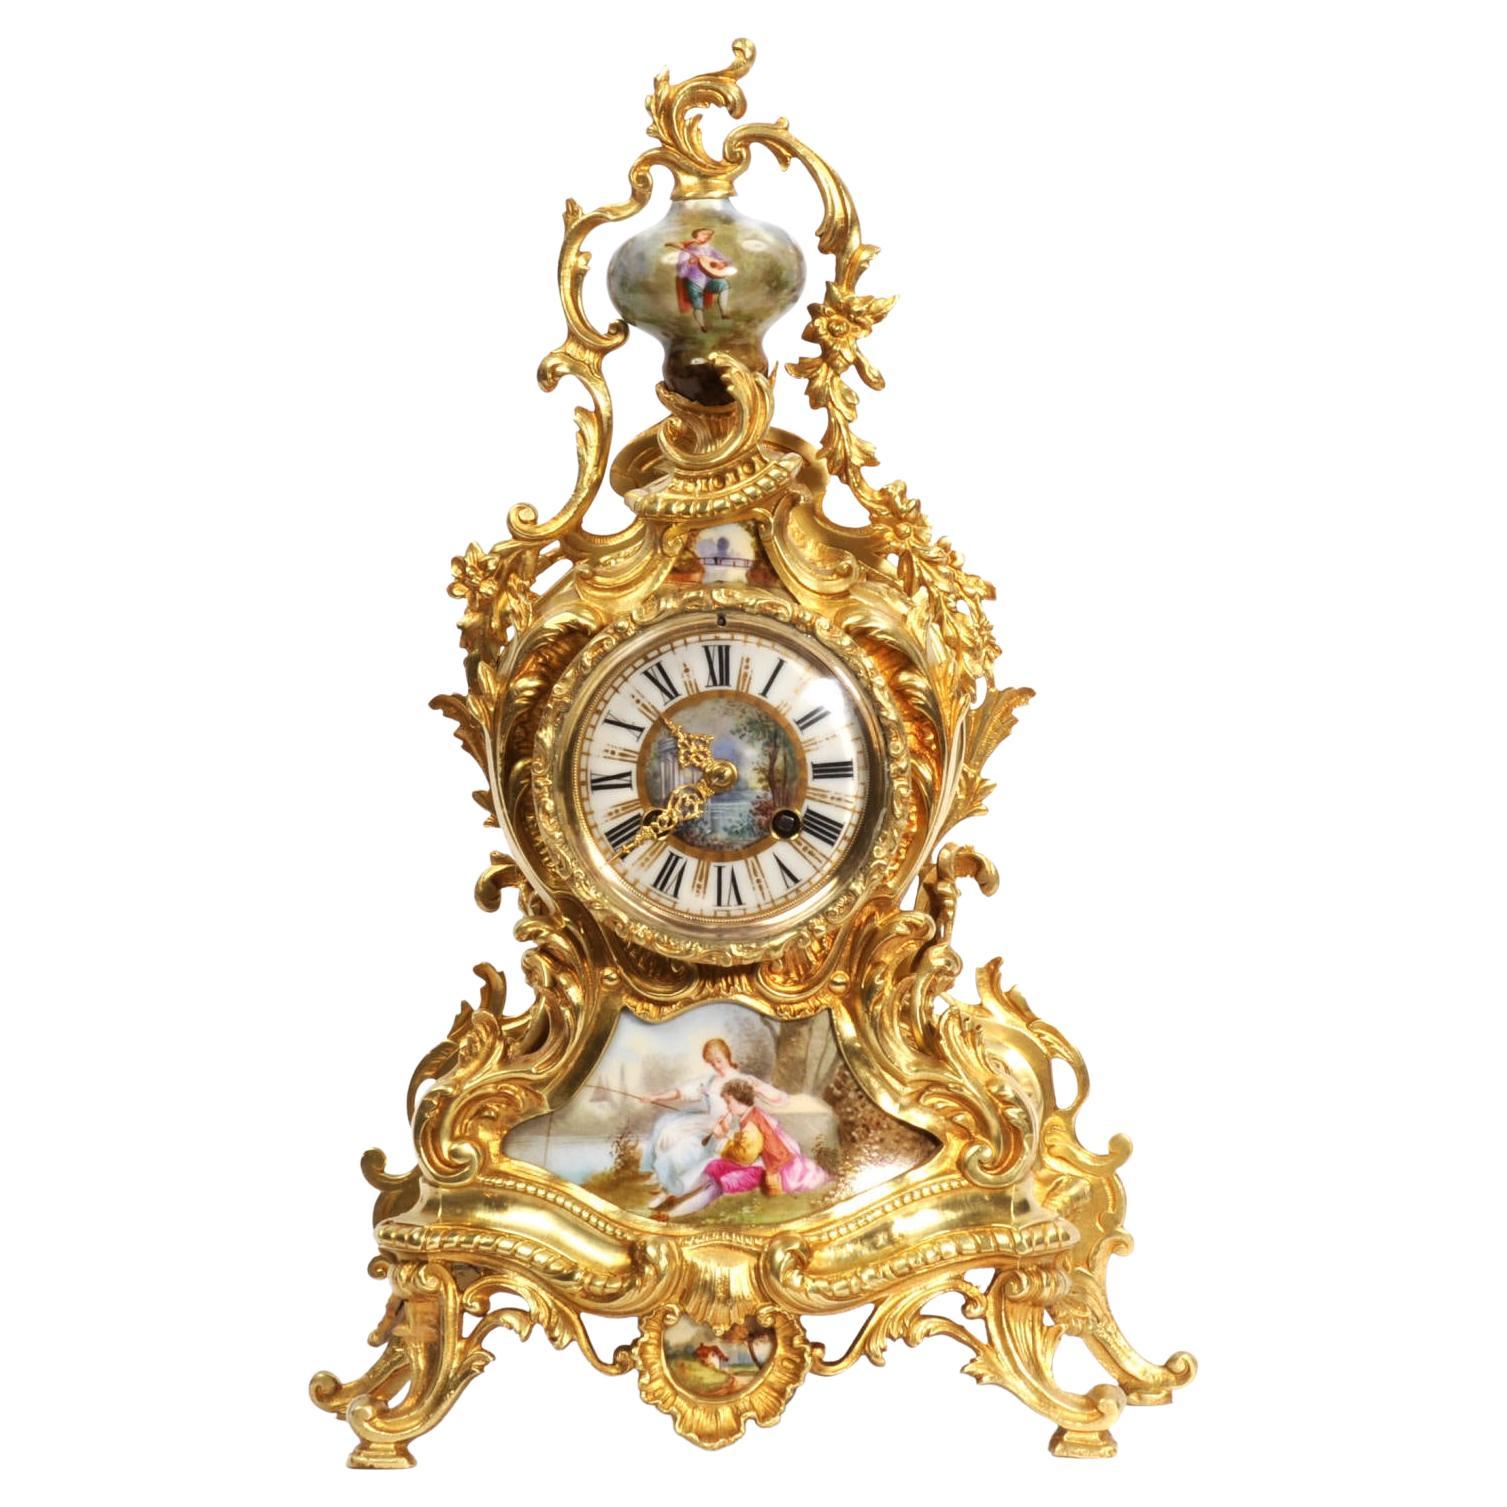 Japy Freres Ormolu and Sevres Porcelain Antique French Clock